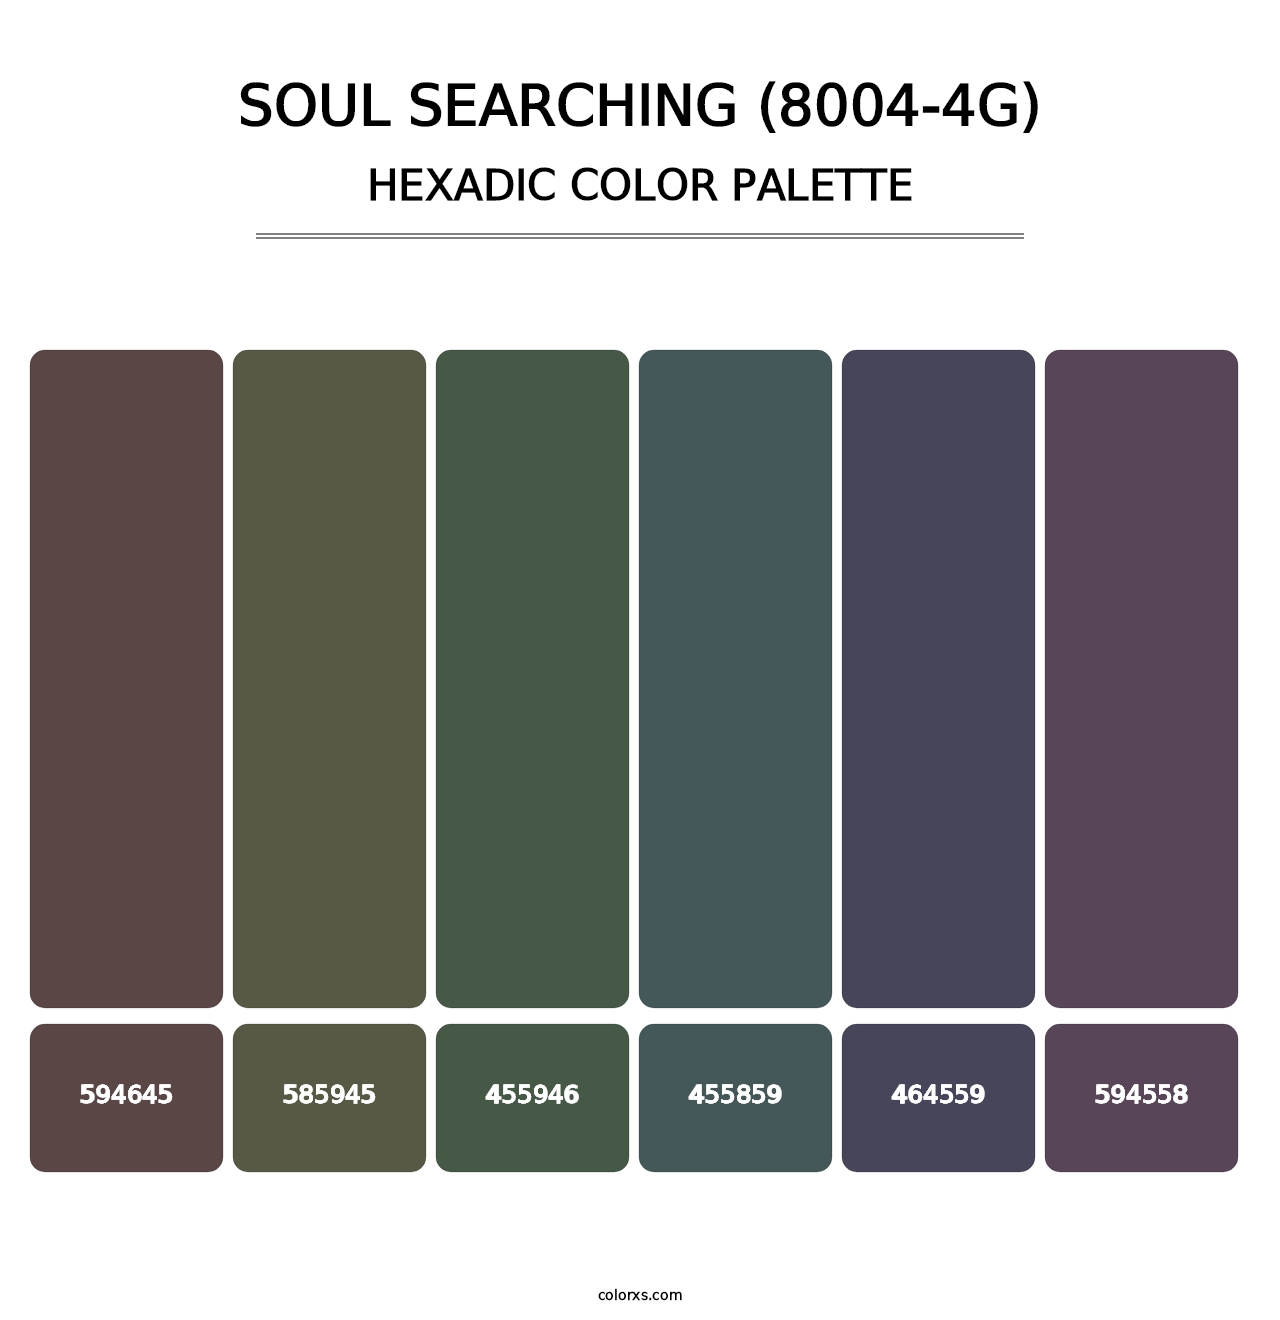 Soul Searching (8004-4G) - Hexadic Color Palette